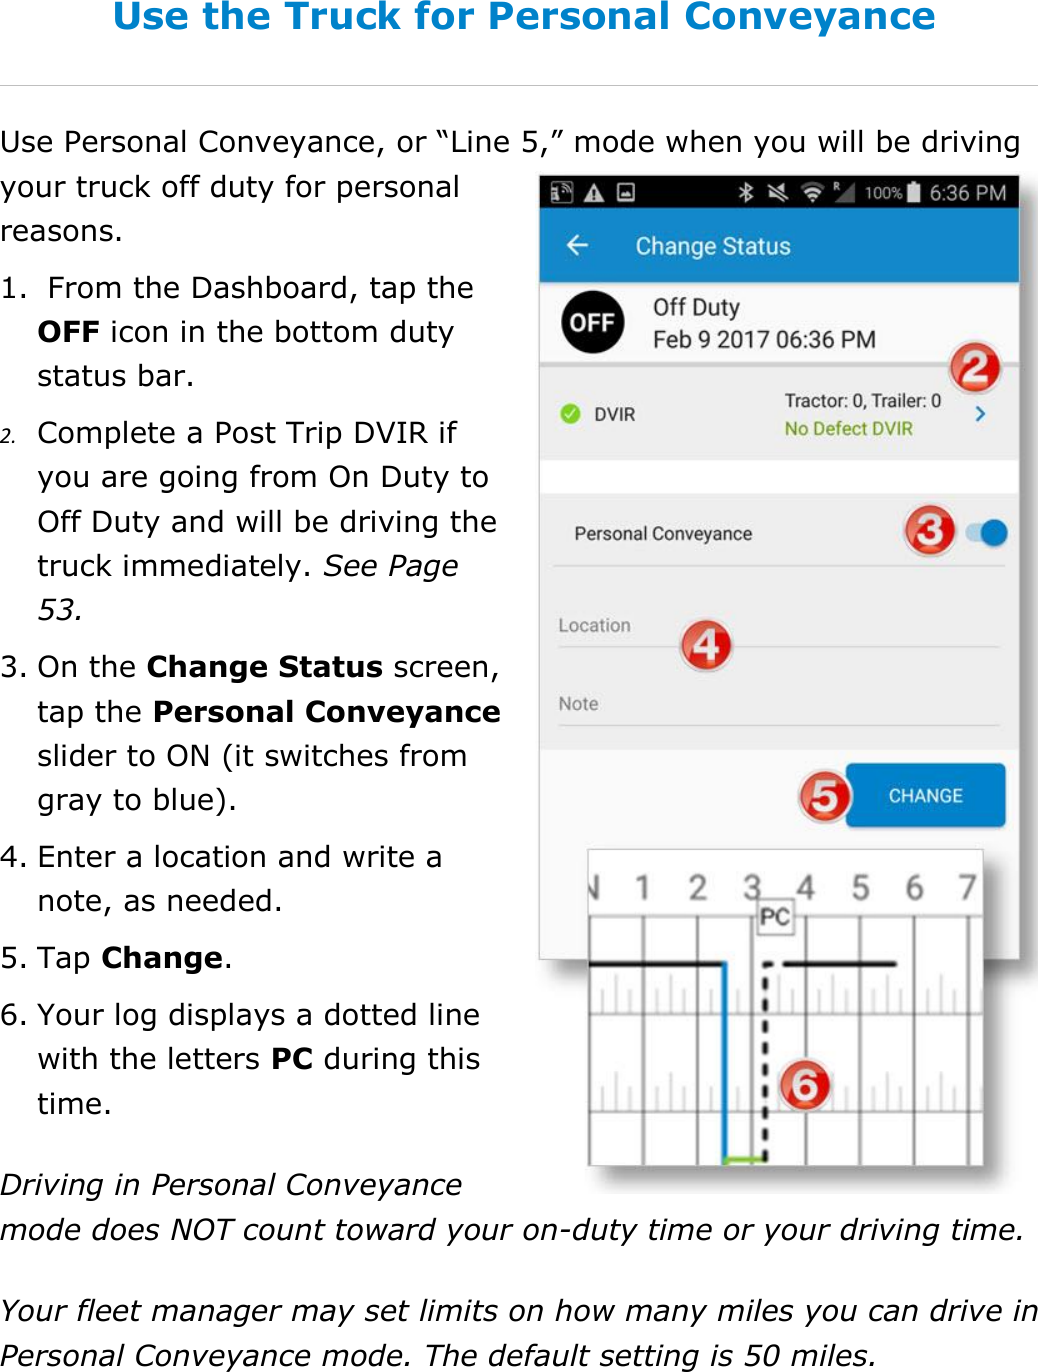 Set My Duty Status DriverConnect User Guide  38 © 2017, Rand McNally, Inc. Use the Truck for Personal Conveyance Use Personal Conveyance, or “Line 5,” mode when you will be driving your truck off duty for personal reasons. 1.  From the Dashboard, tap the OFF icon in the bottom duty status bar. 2. Complete a Post Trip DVIR if you are going from On Duty to Off Duty and will be driving the truck immediately. See Page 53. 3. On the Change Status screen, tap the Personal Conveyance slider to ON (it switches from gray to blue). 4. Enter a location and write a note, as needed. 5. Tap Change. 6. Your log displays a dotted line with the letters PC during this time. Driving in Personal Conveyance mode does NOT count toward your on-duty time or your driving time. Your fleet manager may set limits on how many miles you can drive in Personal Conveyance mode. The default setting is 50 miles. 